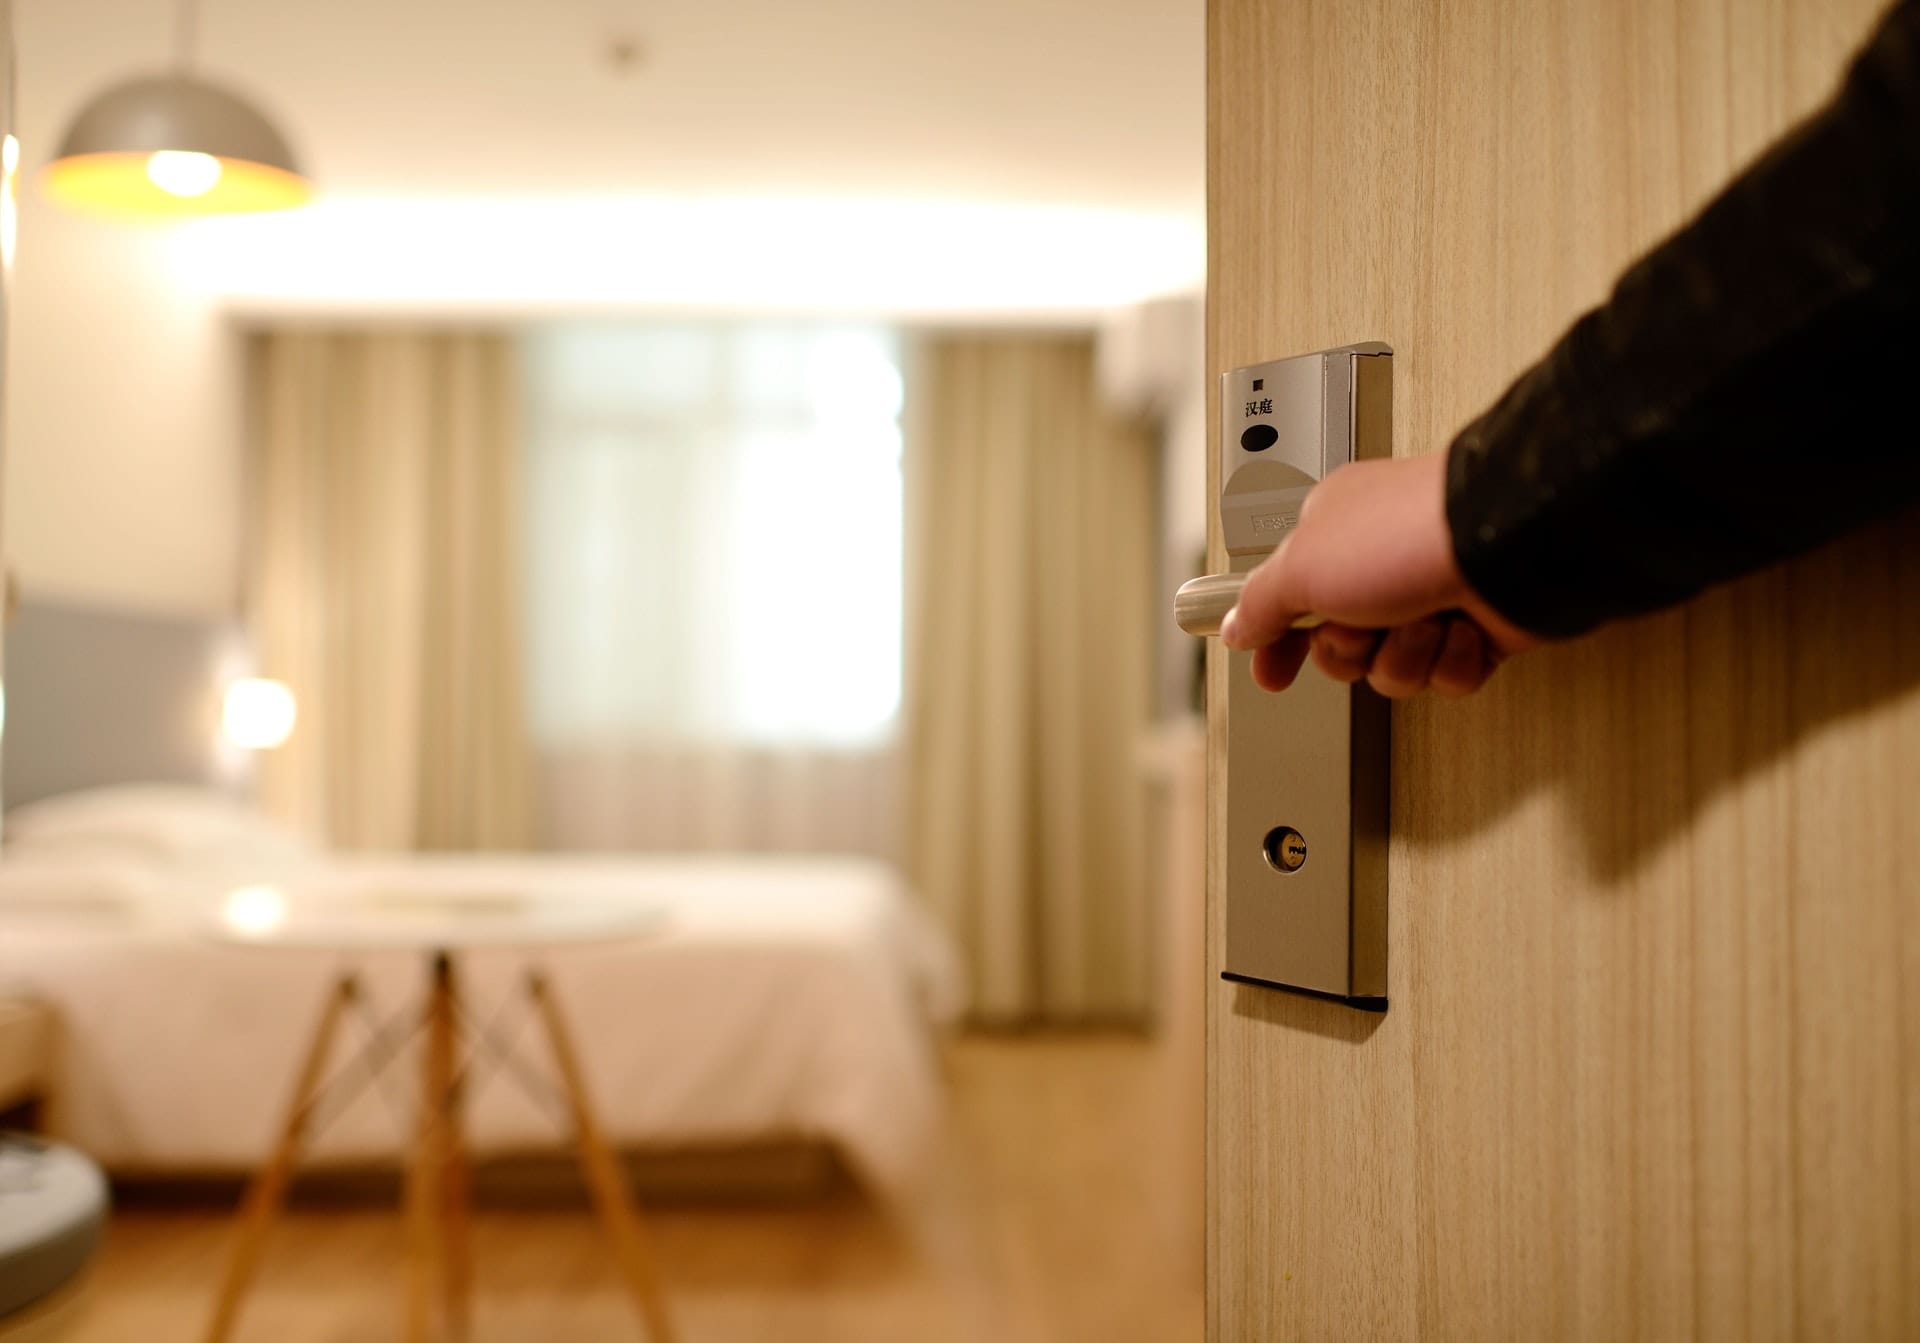 Can you rent hotel rooms by the month?